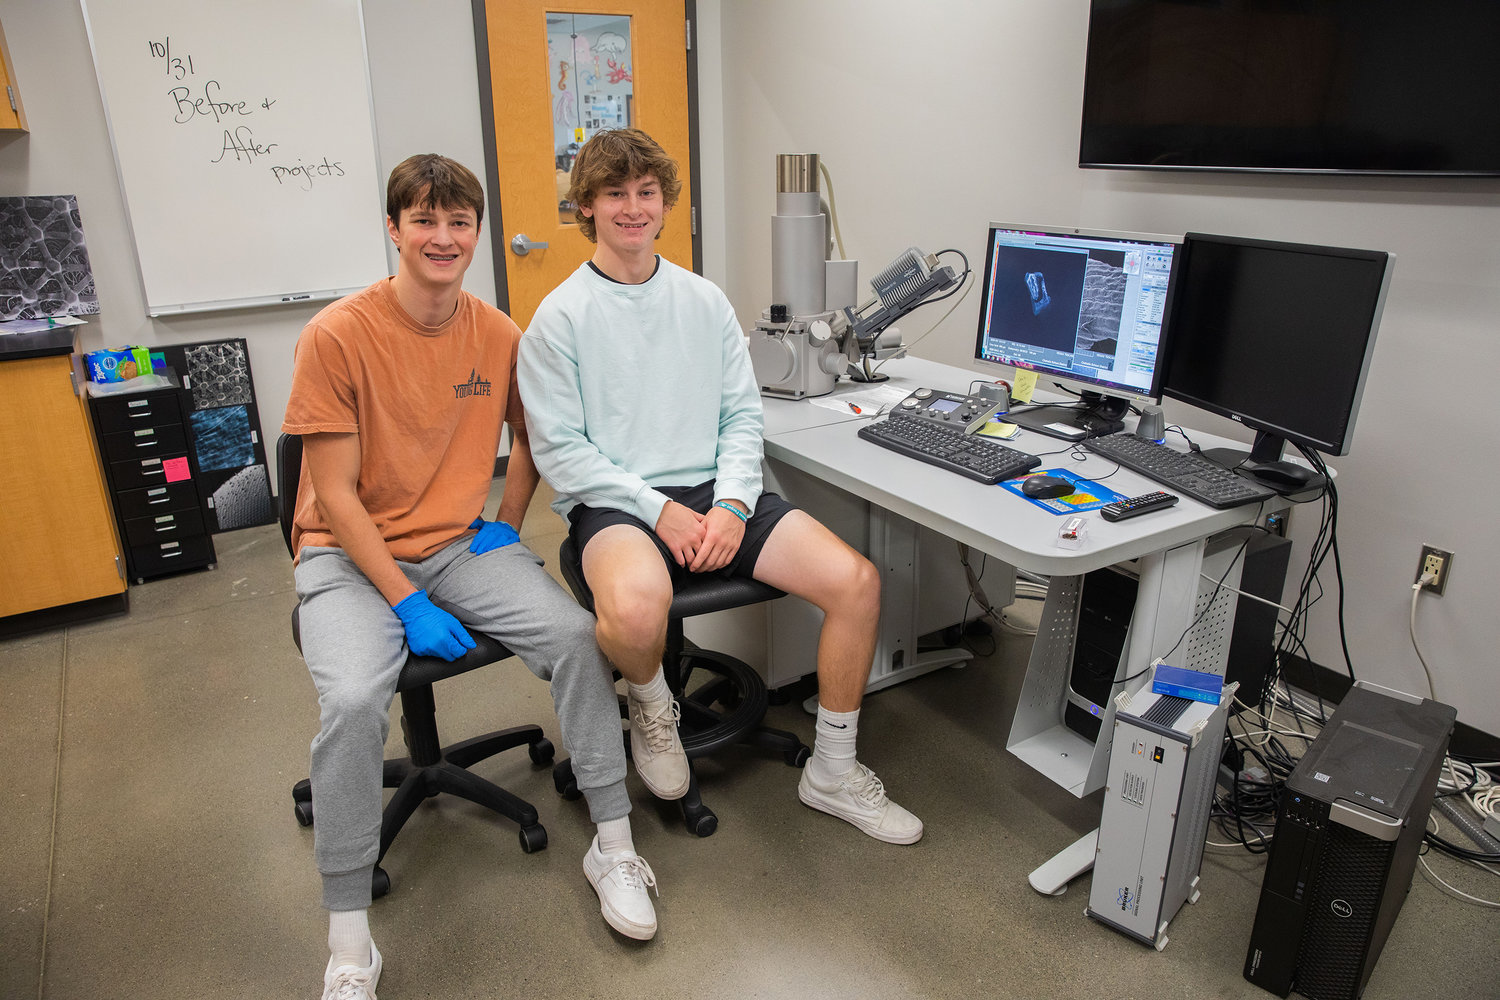 Ethan Klovdahl and Avery Staloch smile for a photo while working with a Scanning Electron Microscope at W.F. West on a Thursday morning in Chehalis.